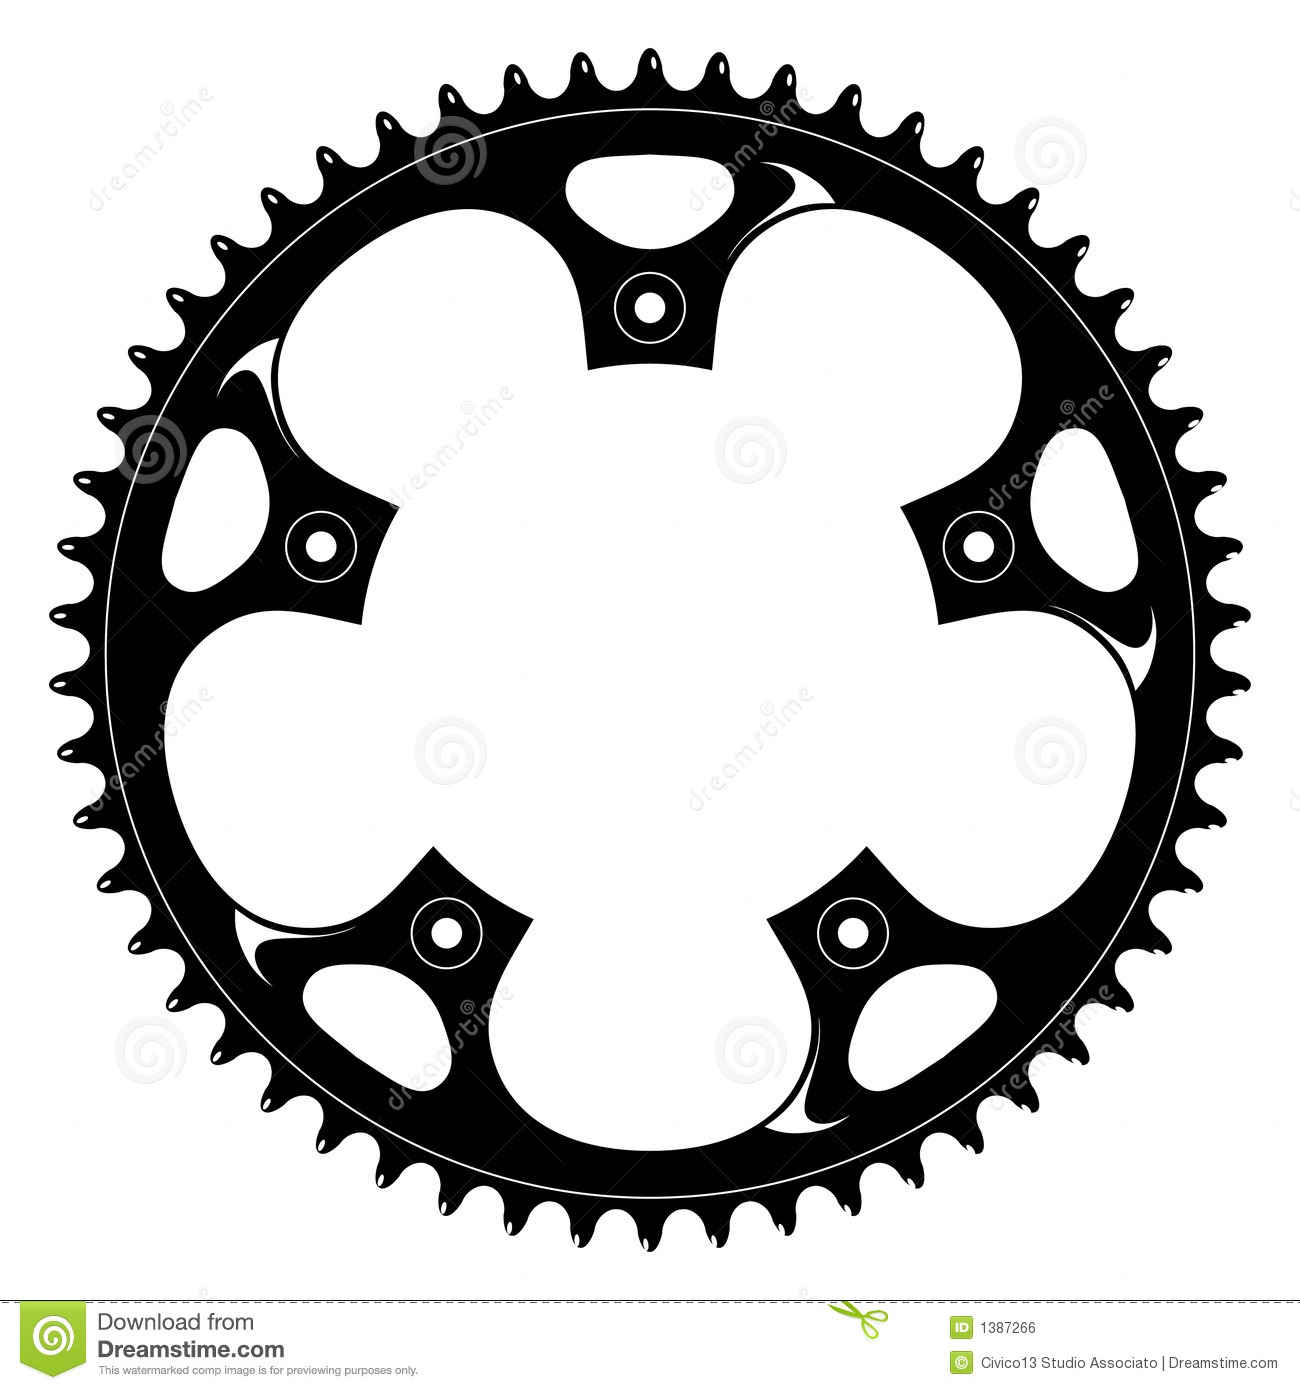 15 Bicycle Gear Vector Graphics Images